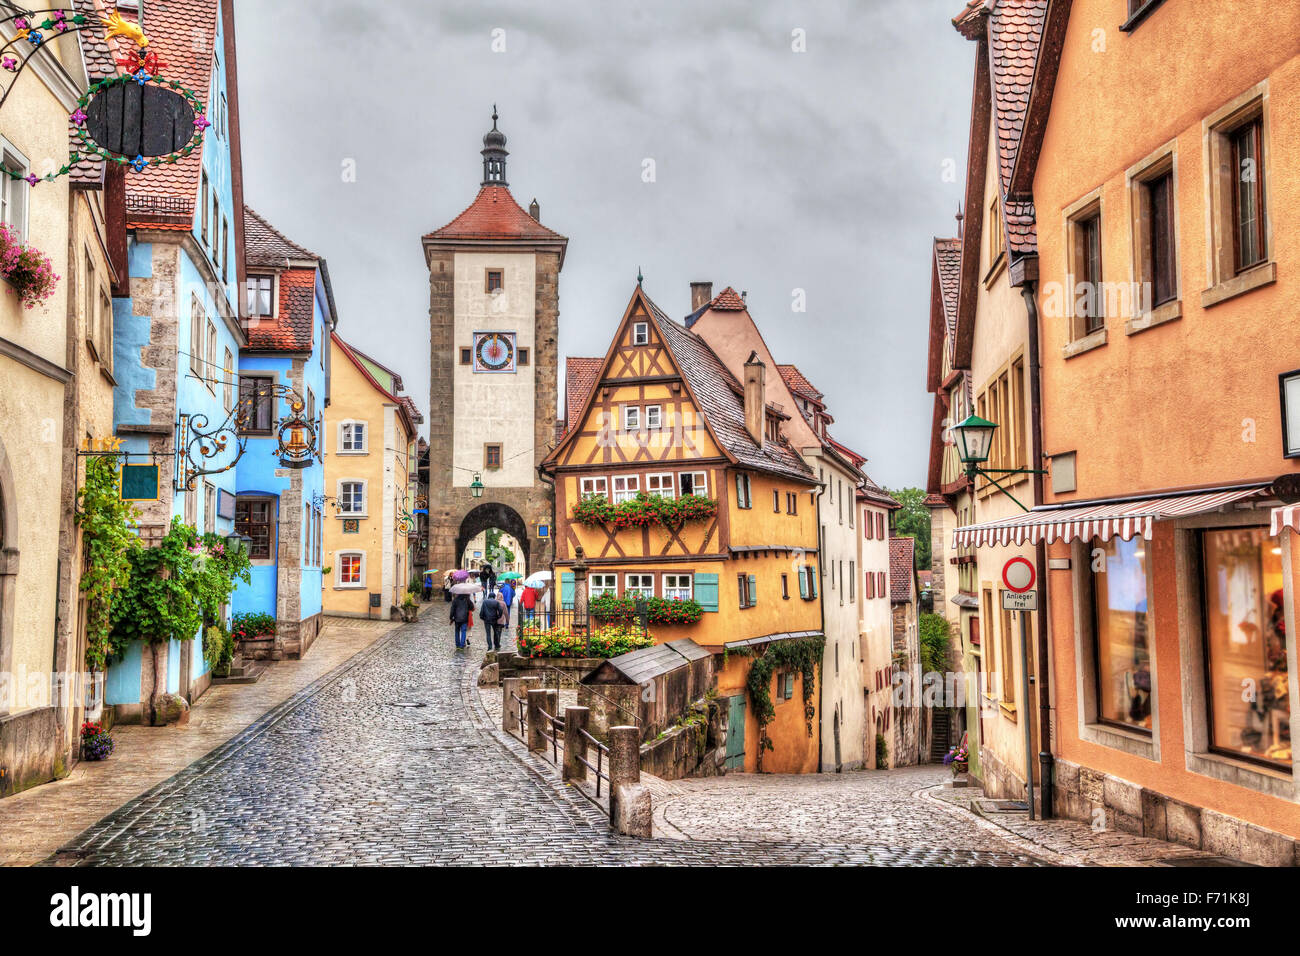 Picturesque view of medieval town Rothenburg ob der Tauber in rainy weather with HDR effect, Bavaria, Germany Stock Photo